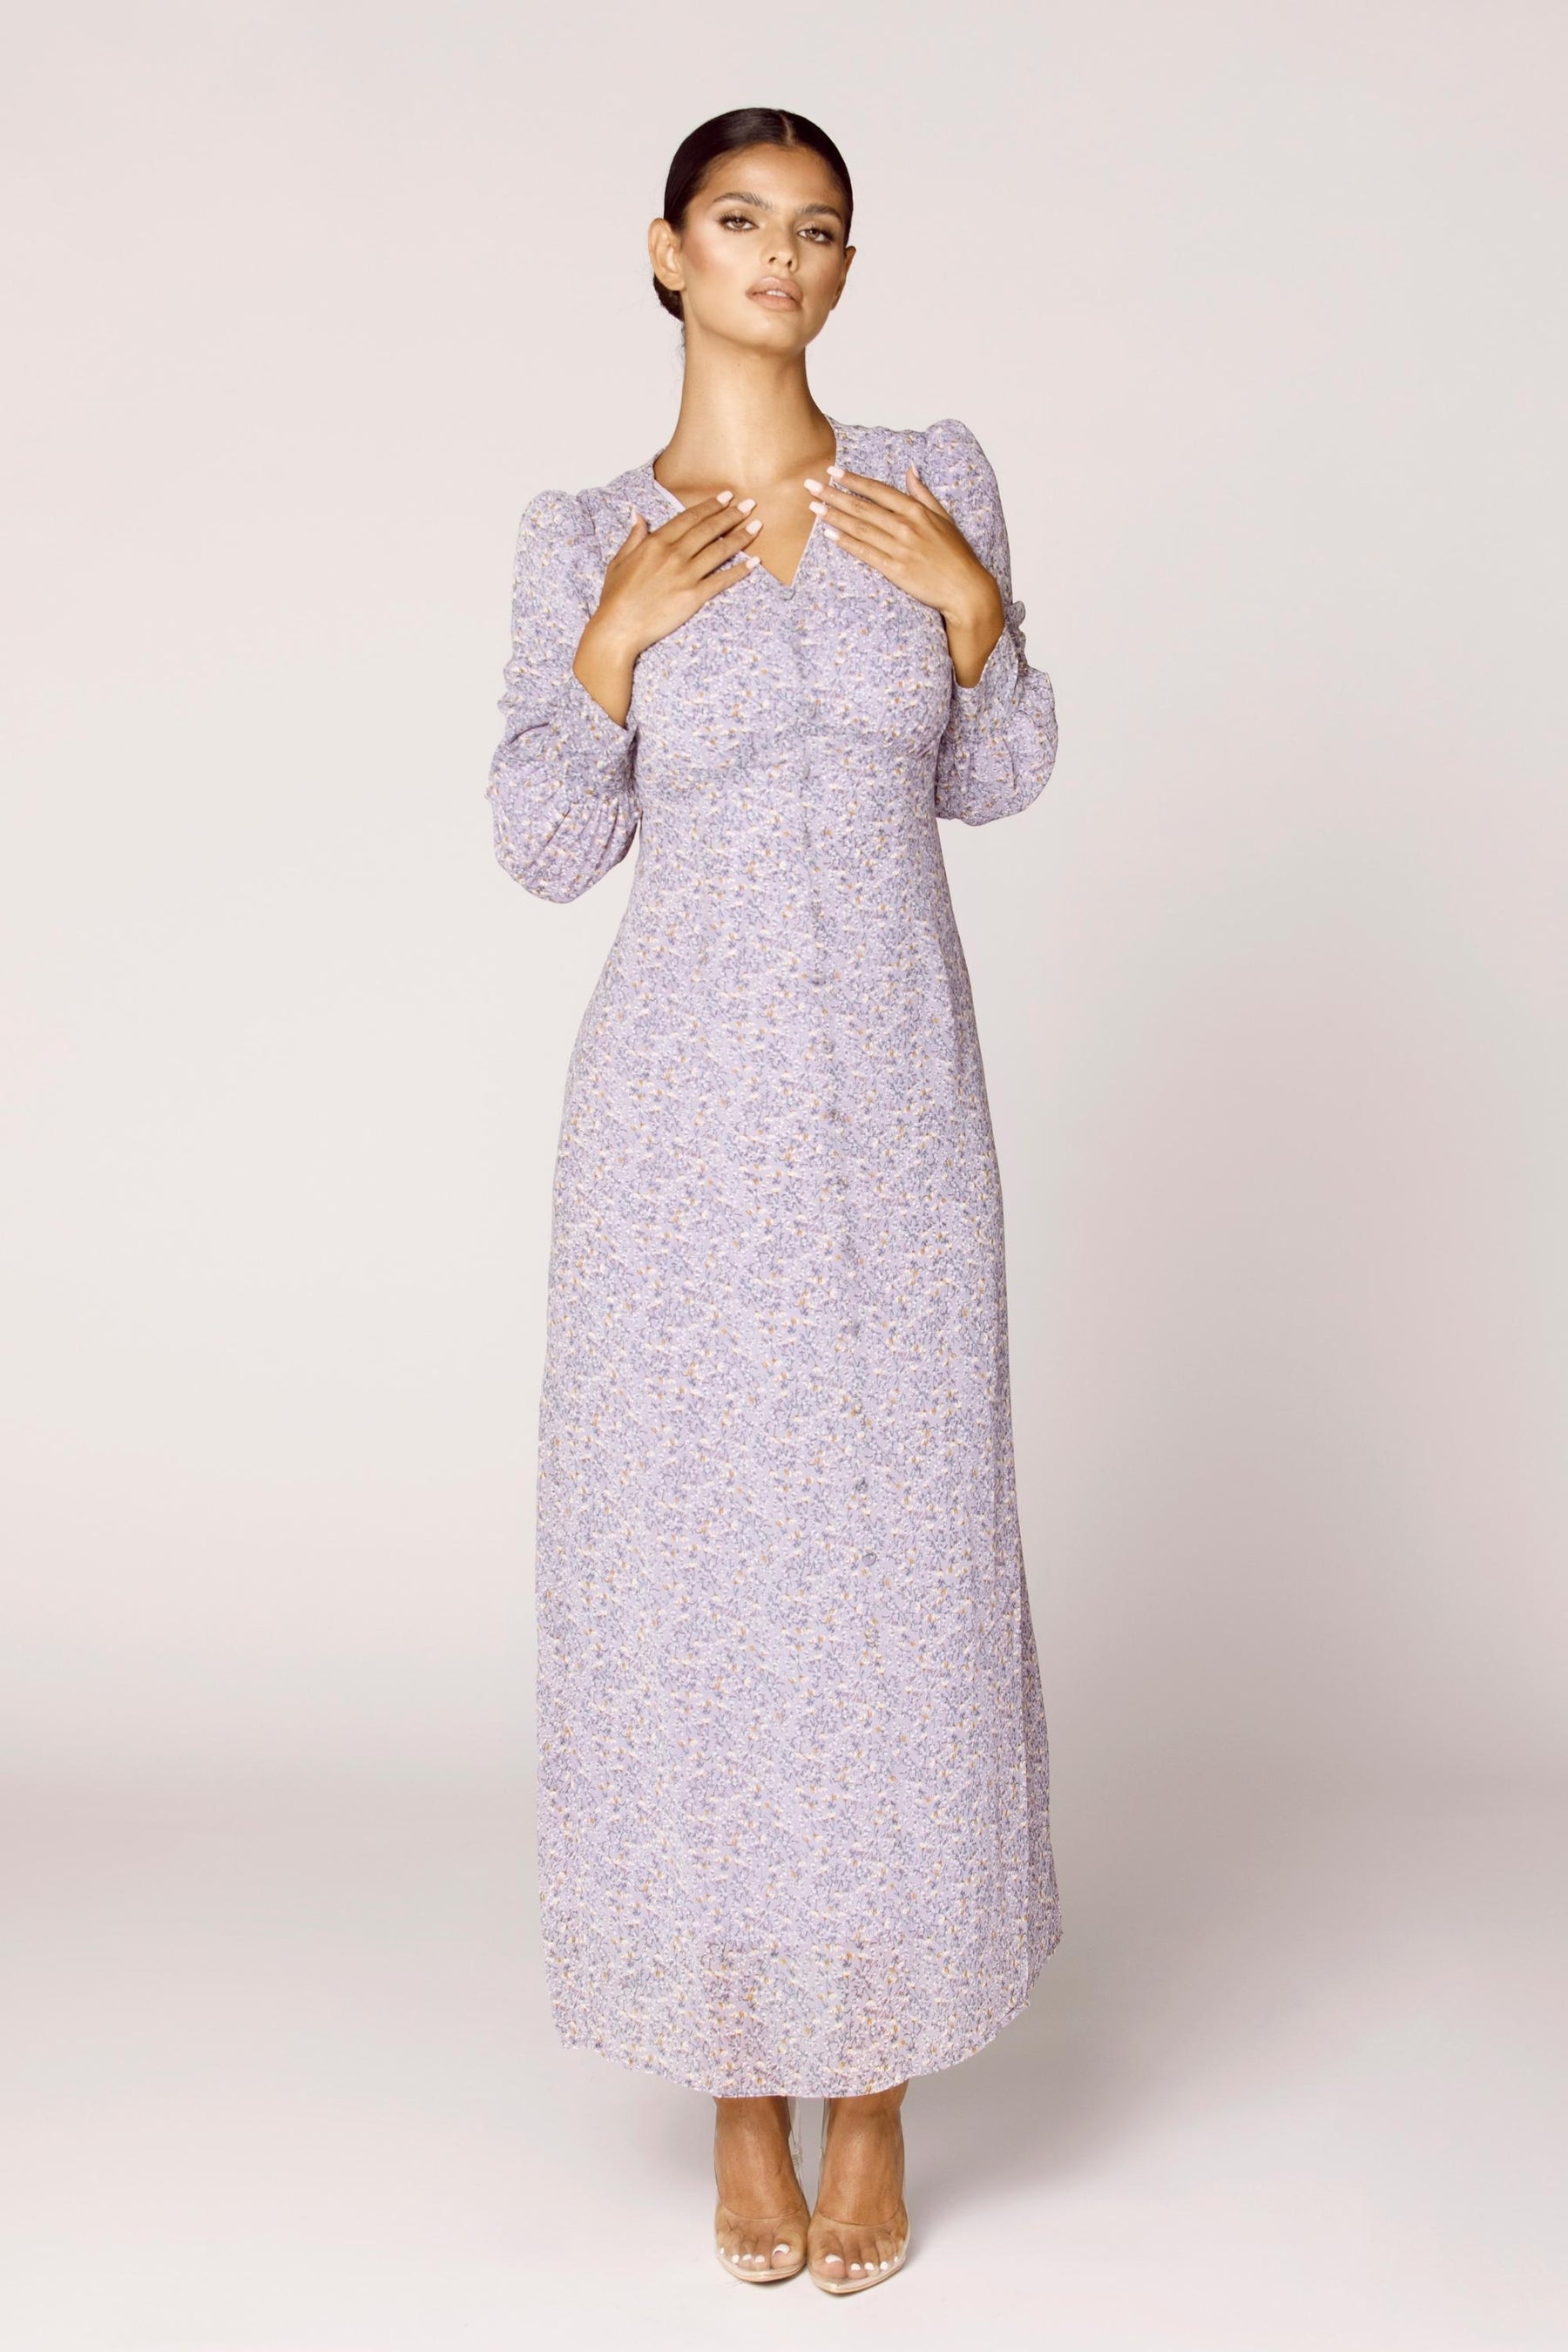 Pastel Floral Maxi Dress Veiled Collection 